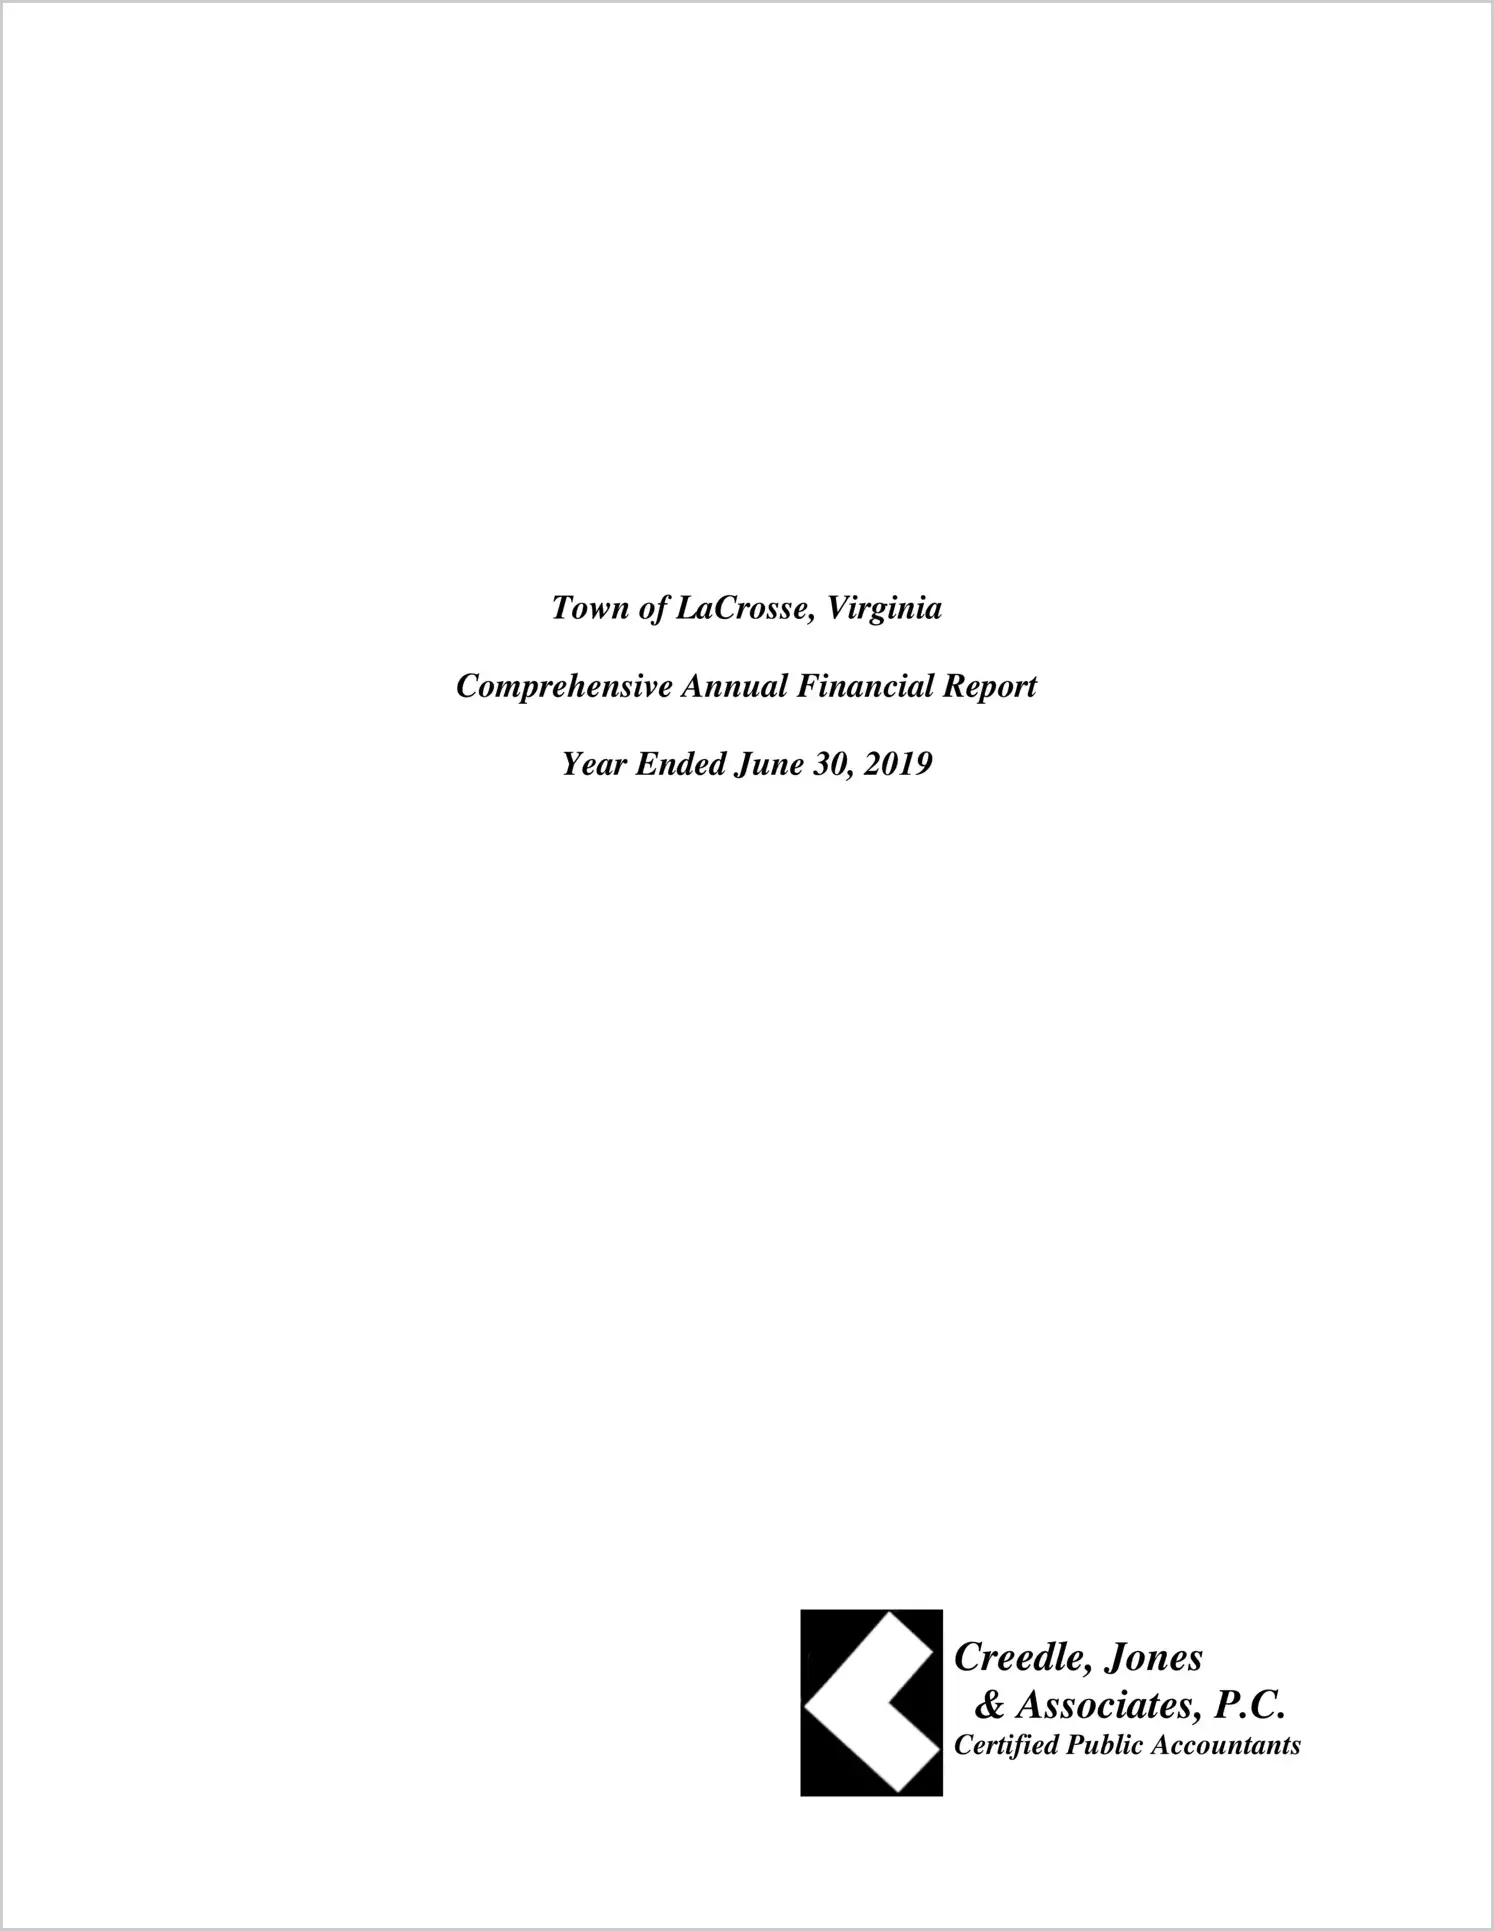 2019 Annual Financial Report for Town of La Crosse